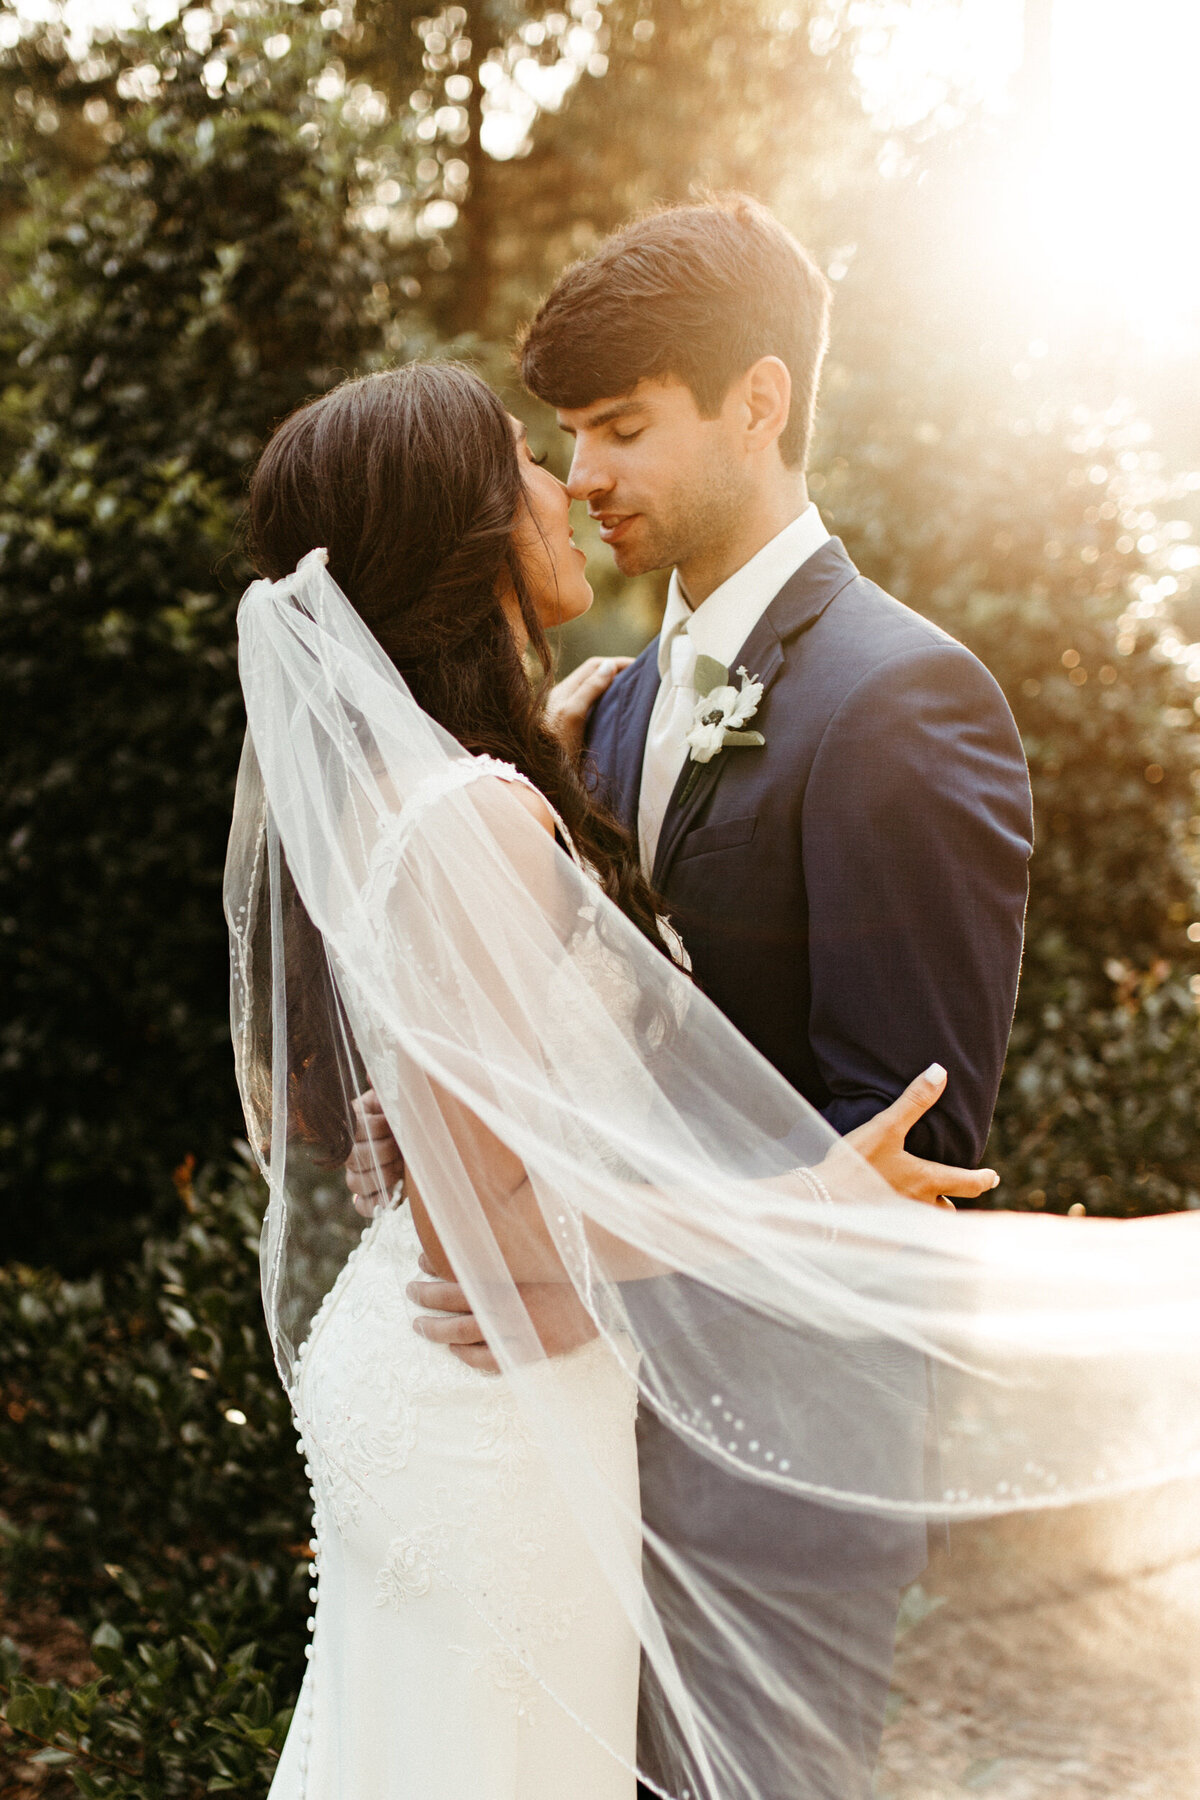 Groom holding bride close as her veil blows in the wind with a sun flare behind them